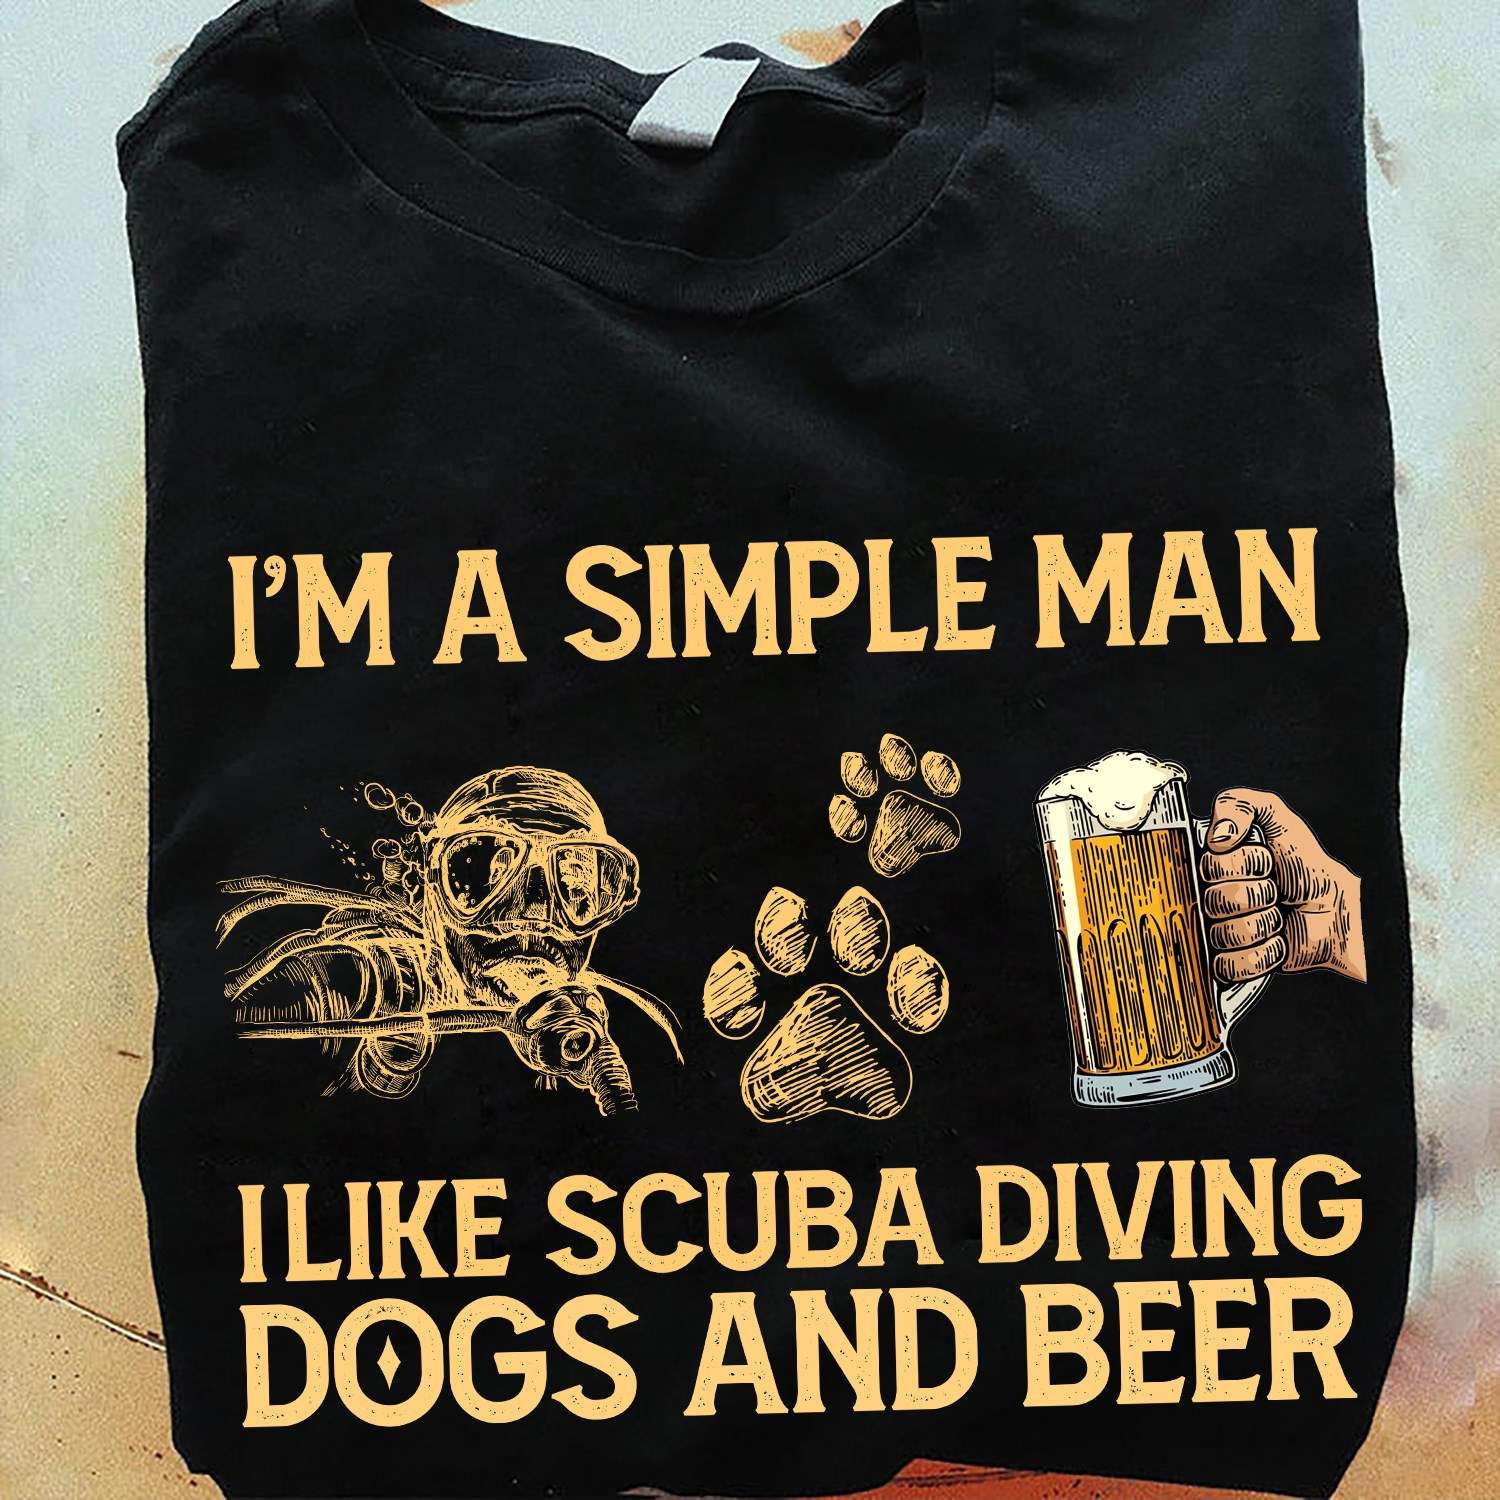 Scuba Diving Dogs And Beer - I'm a simple man i like scuba diving dogs and beer